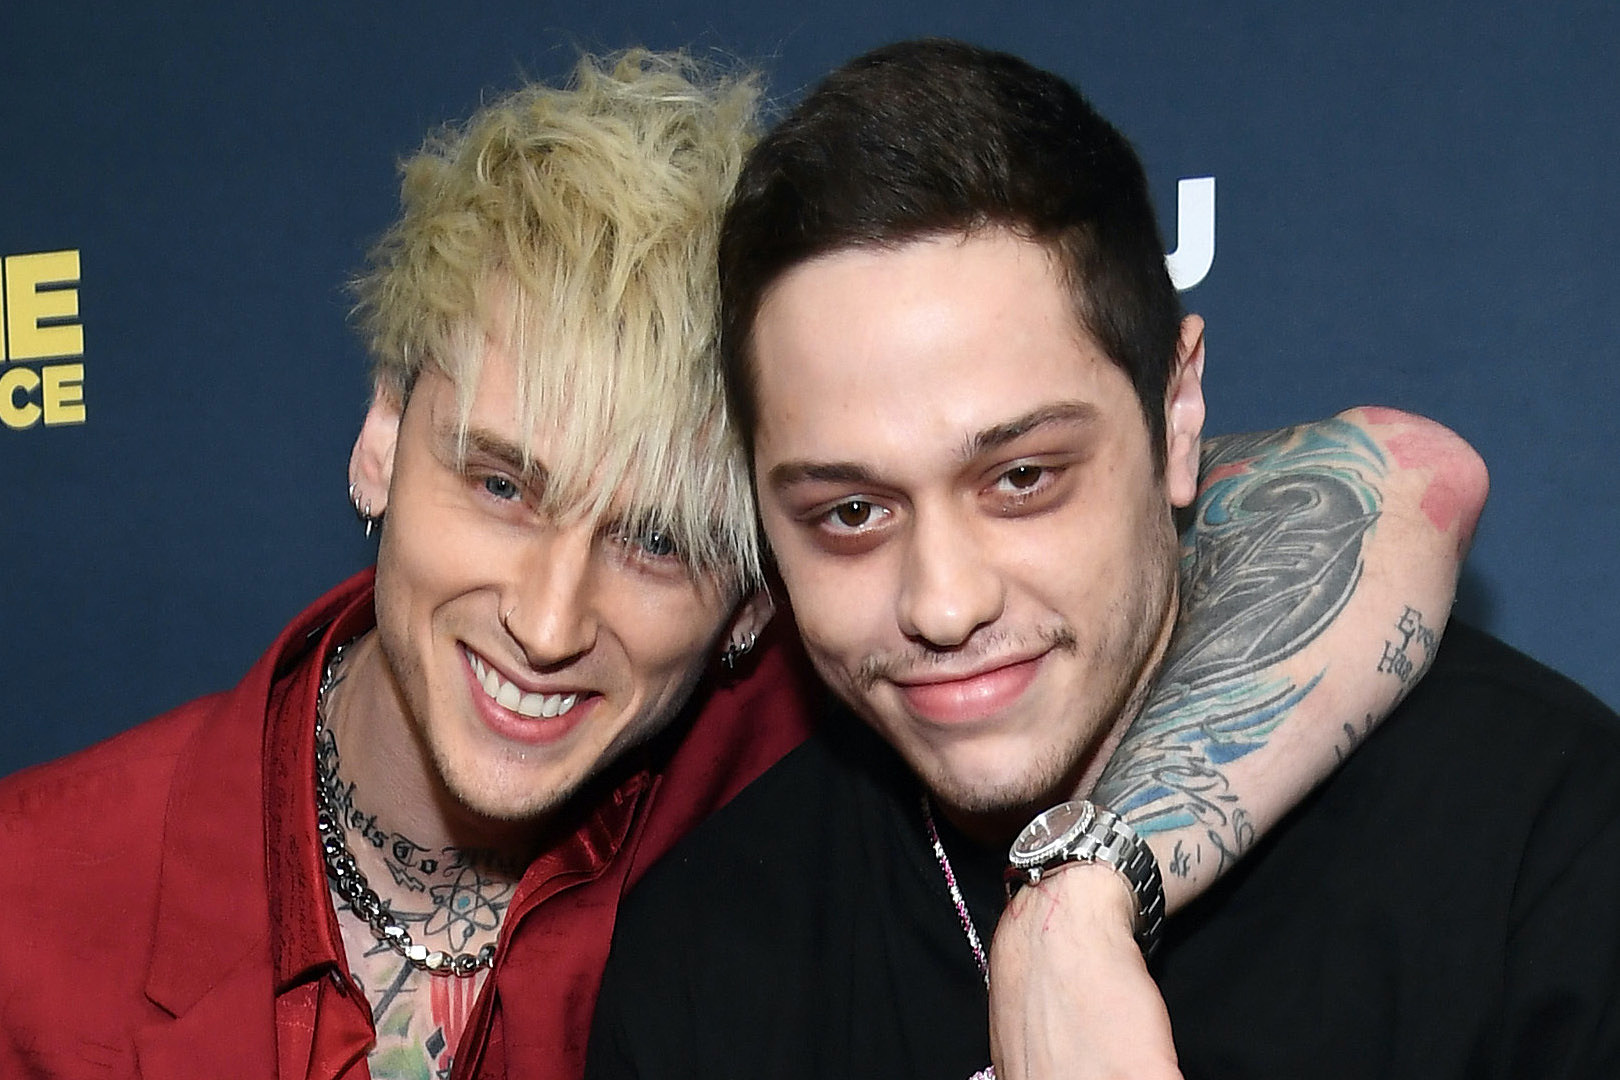 MGK + Pete Davidson Hang Out in Underwear Together on Livestream